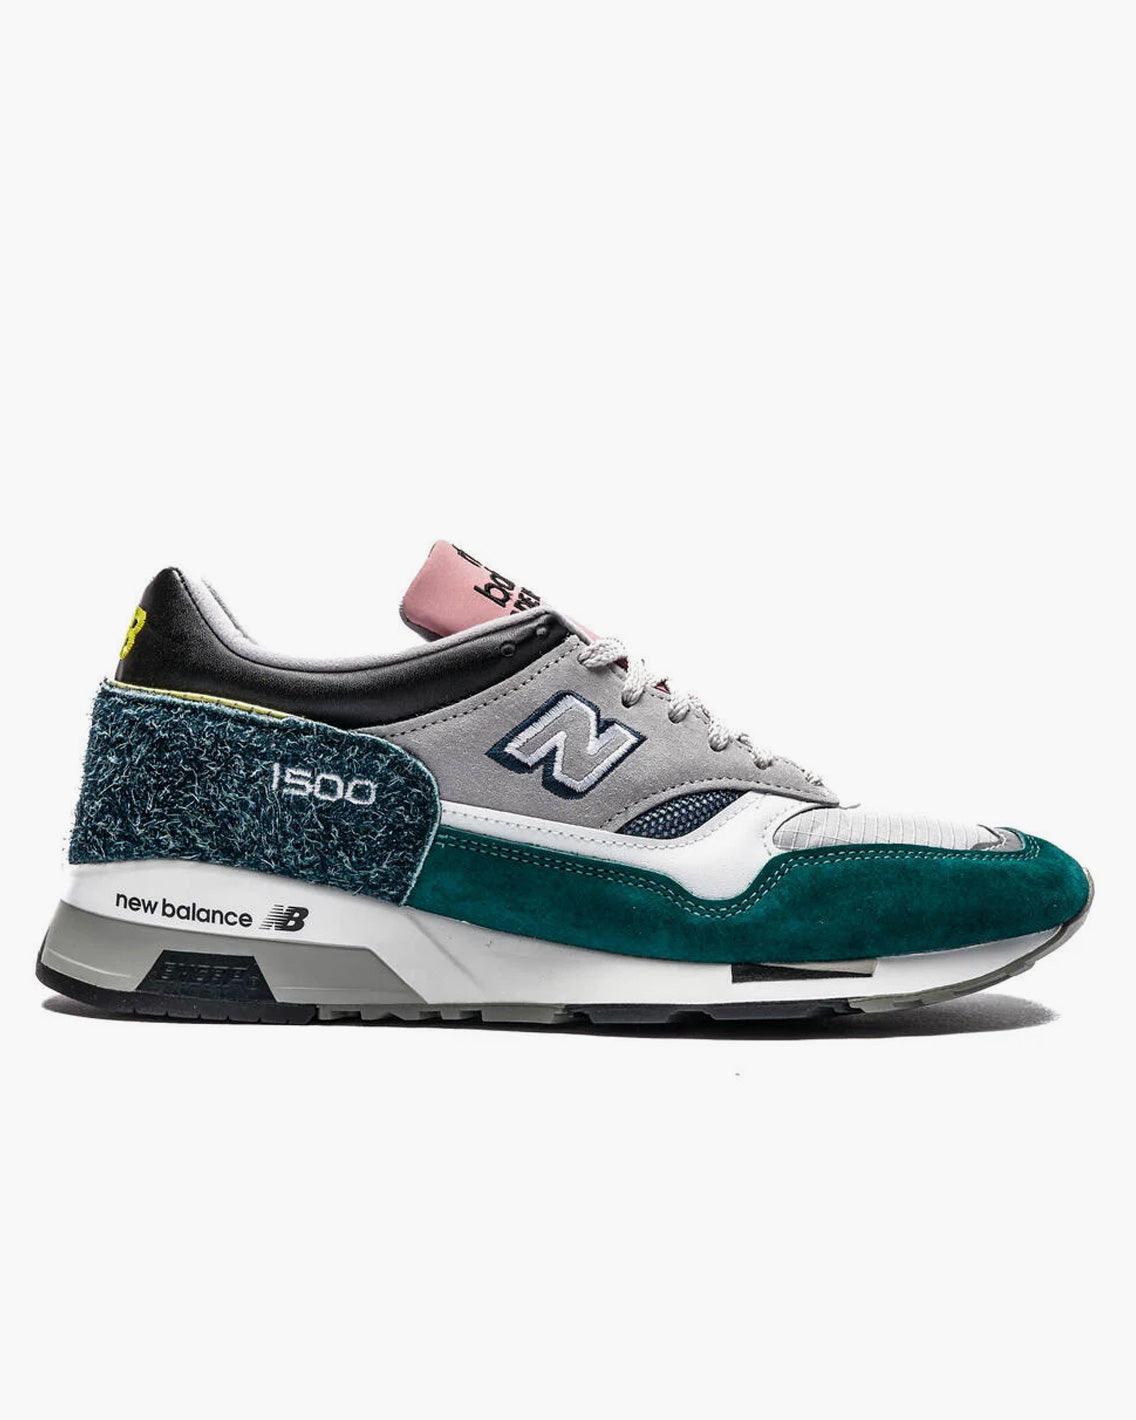 New Balance - M1500PSG MADE in UK - Teal / Grey Shoes New Balance   